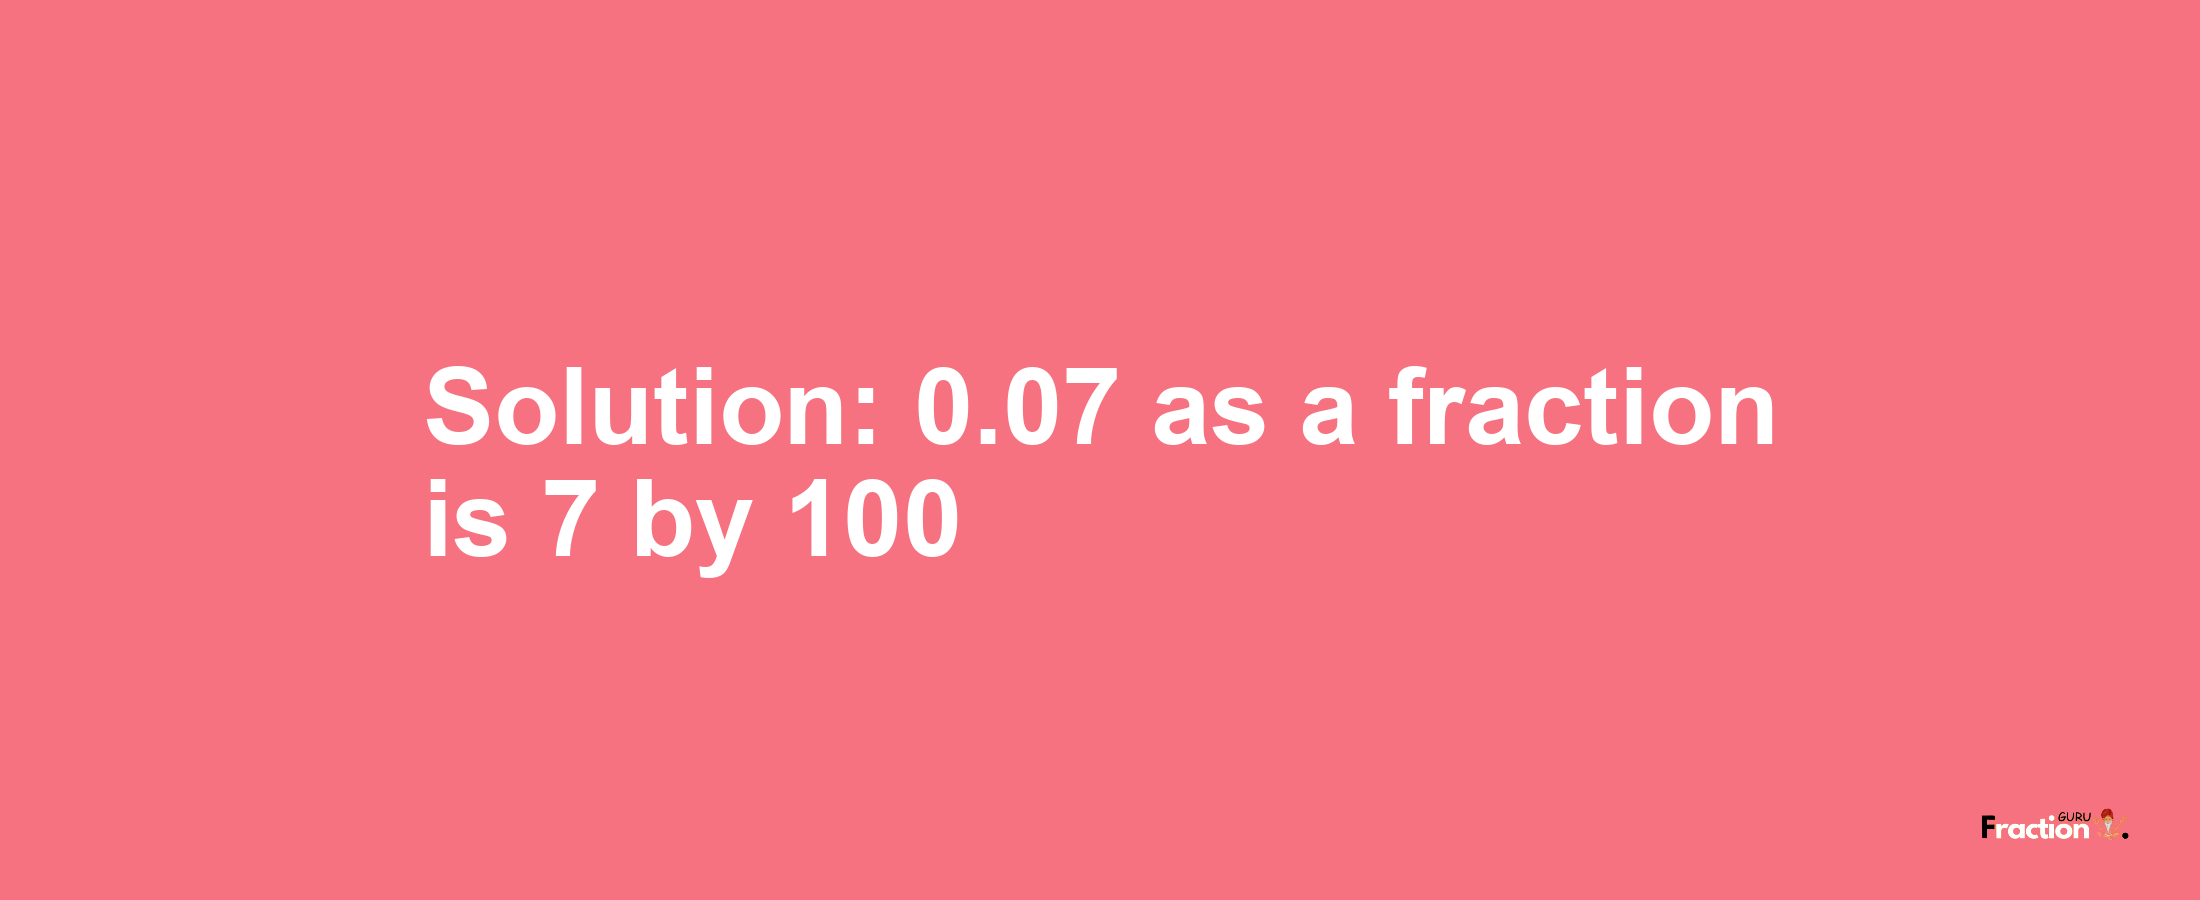 Solution:0.07 as a fraction is 7/100